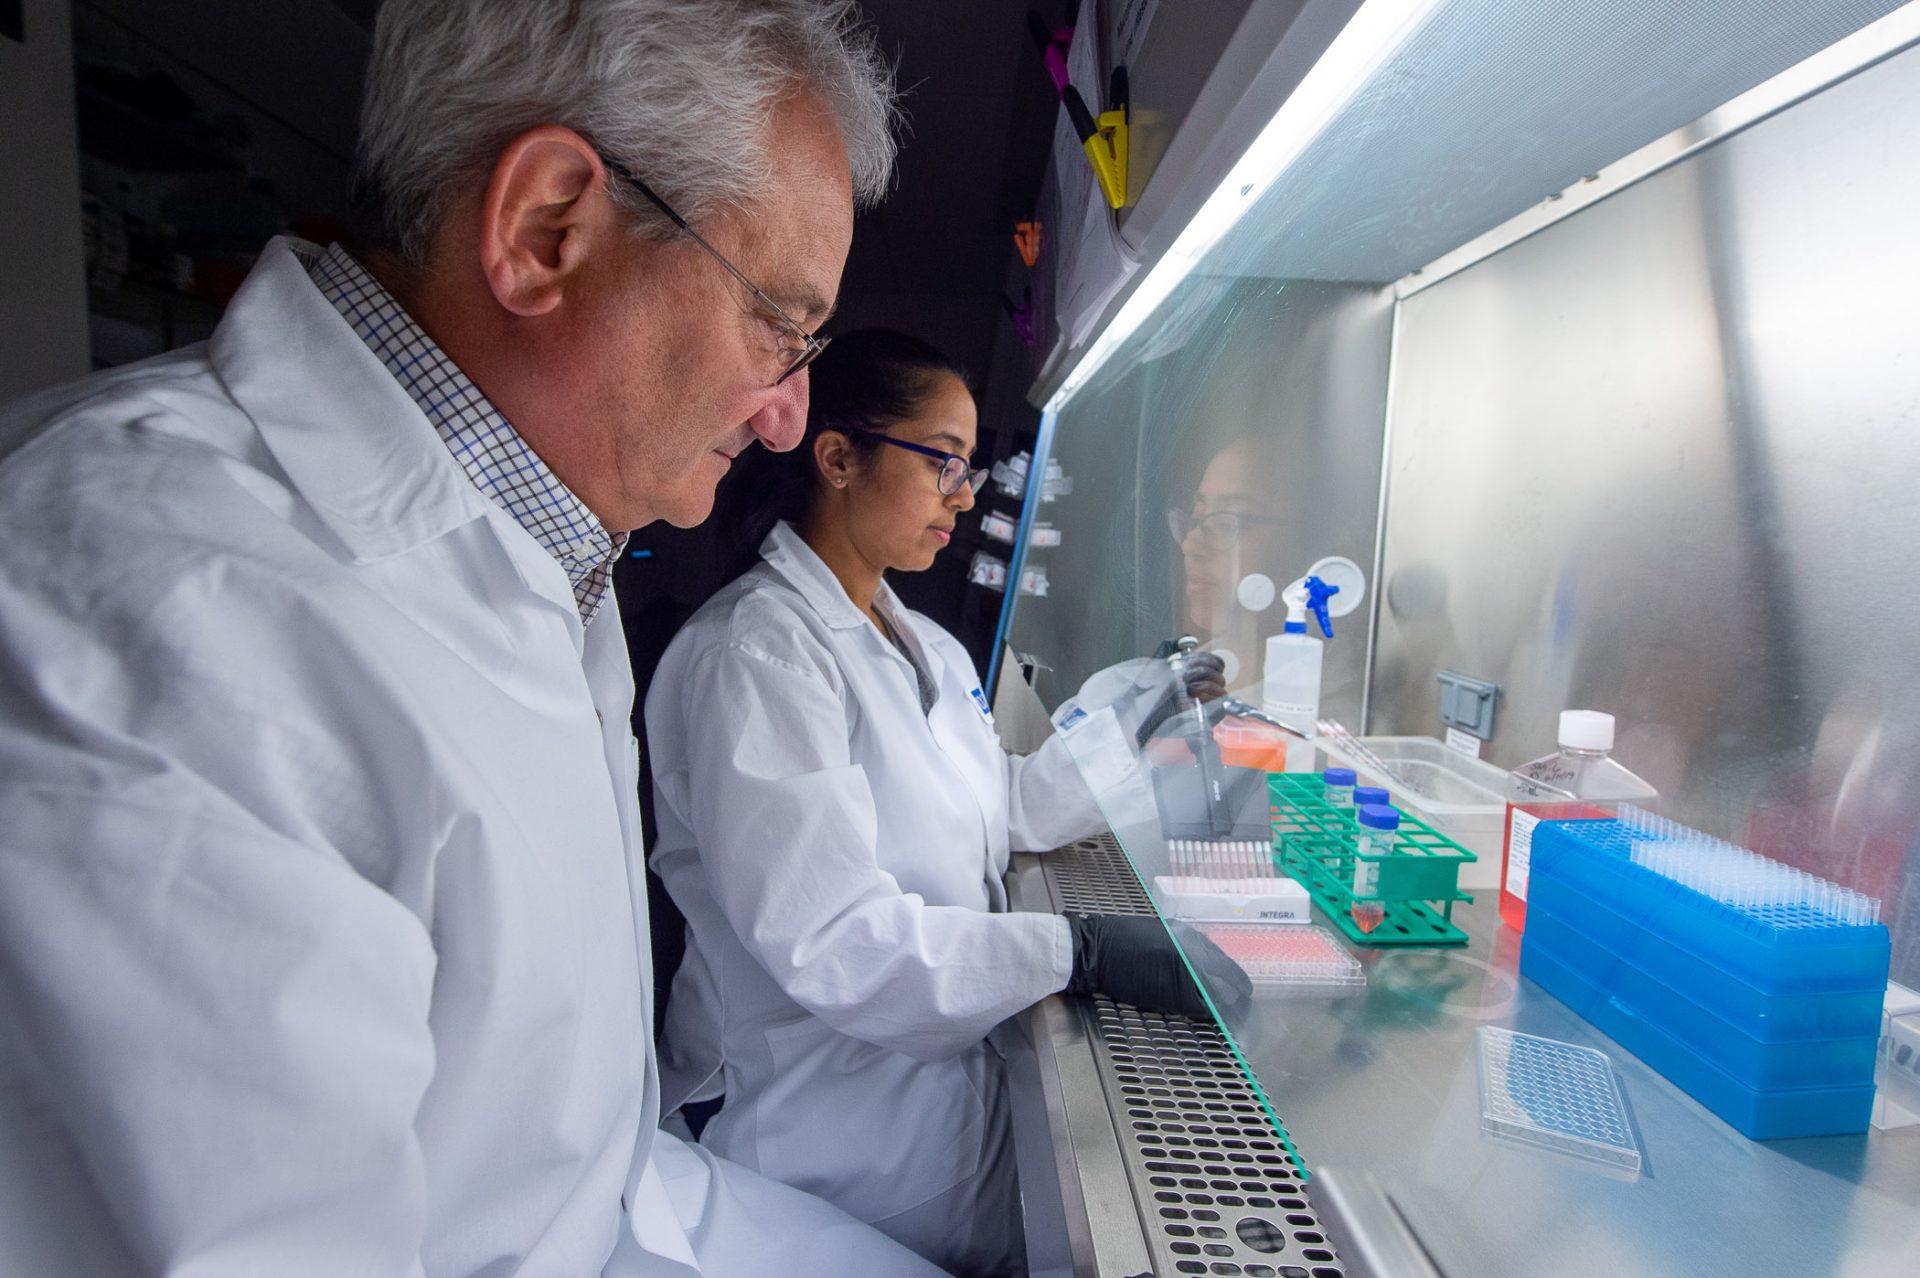 Dr. David Weiner (left), director of Wistar’s Vaccine and Immunotherapy Center, and Dr. Ami Patel, research assistant professor, work on synthetic DNA technology prior to the COVID-19 pandemic outbreak.